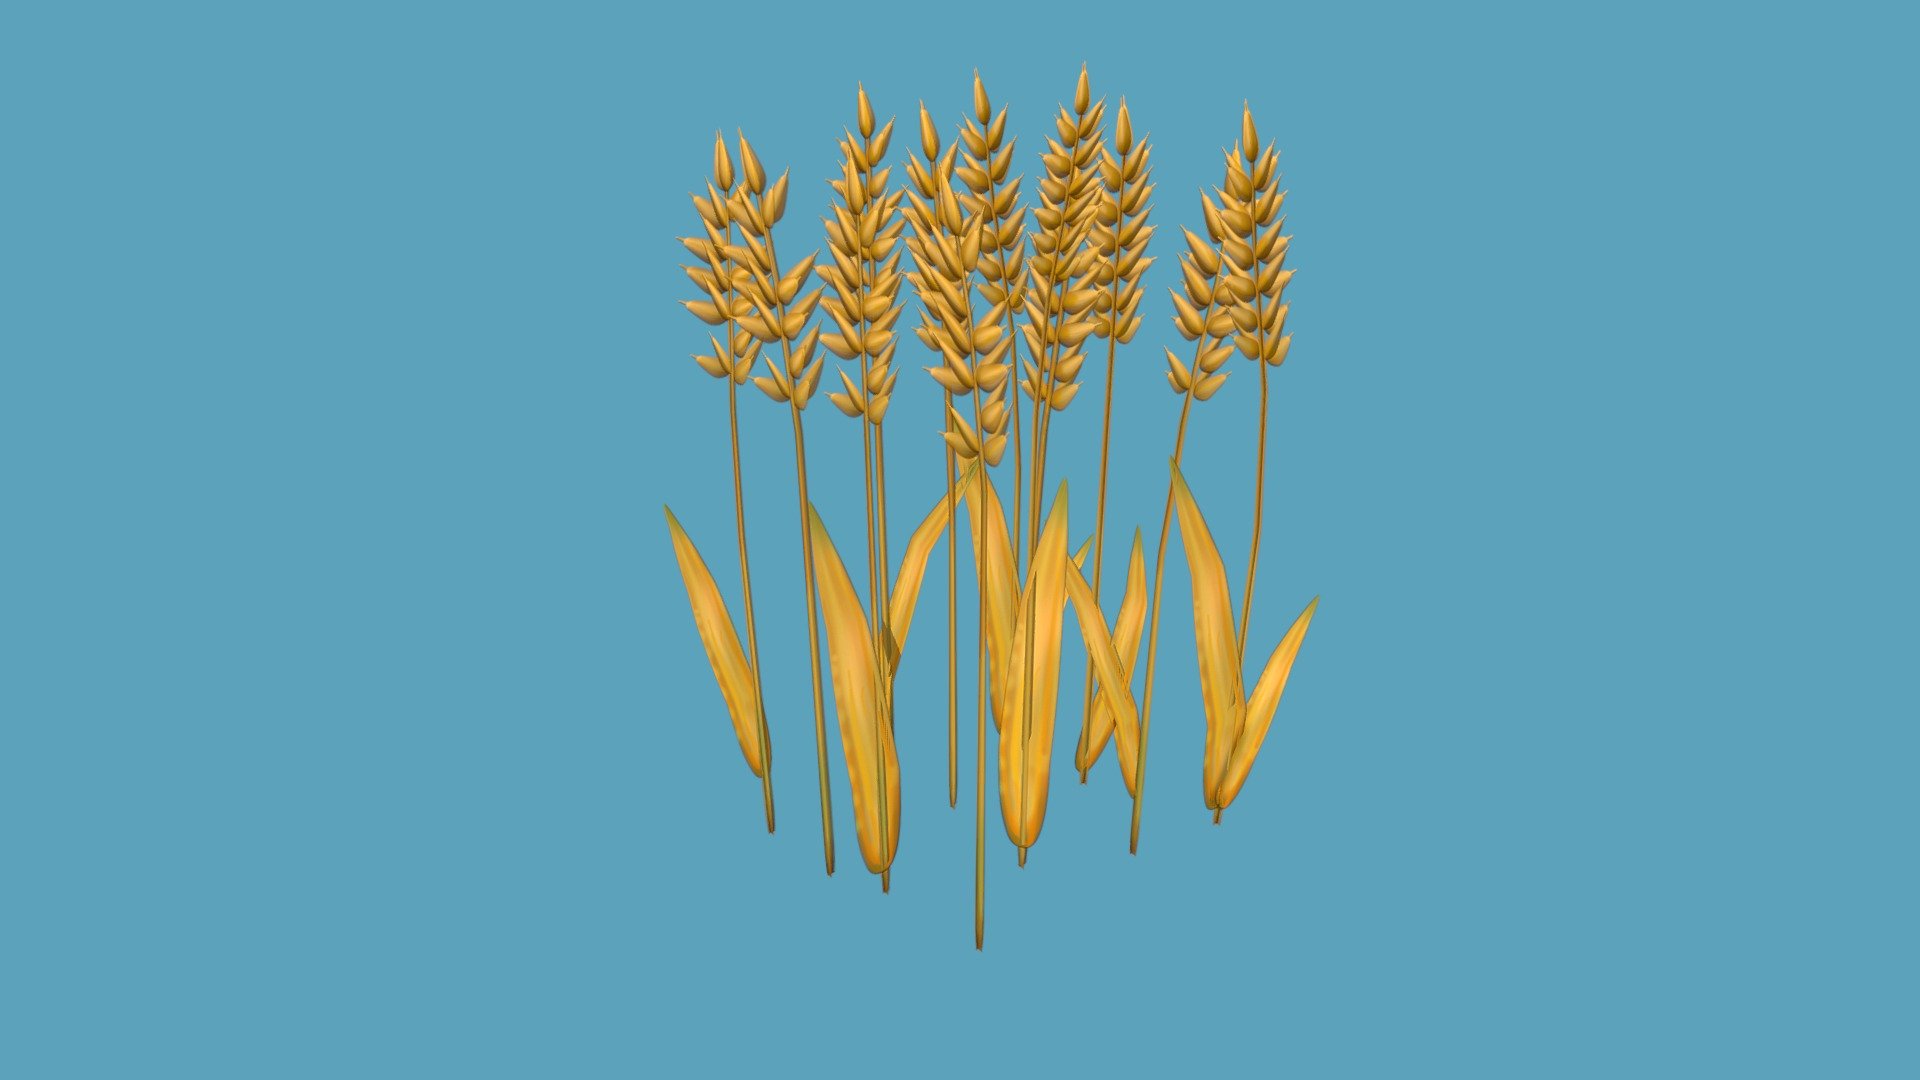 The backrooms- Level 10, A wheat field. Lore/Desc:Level 10 is a